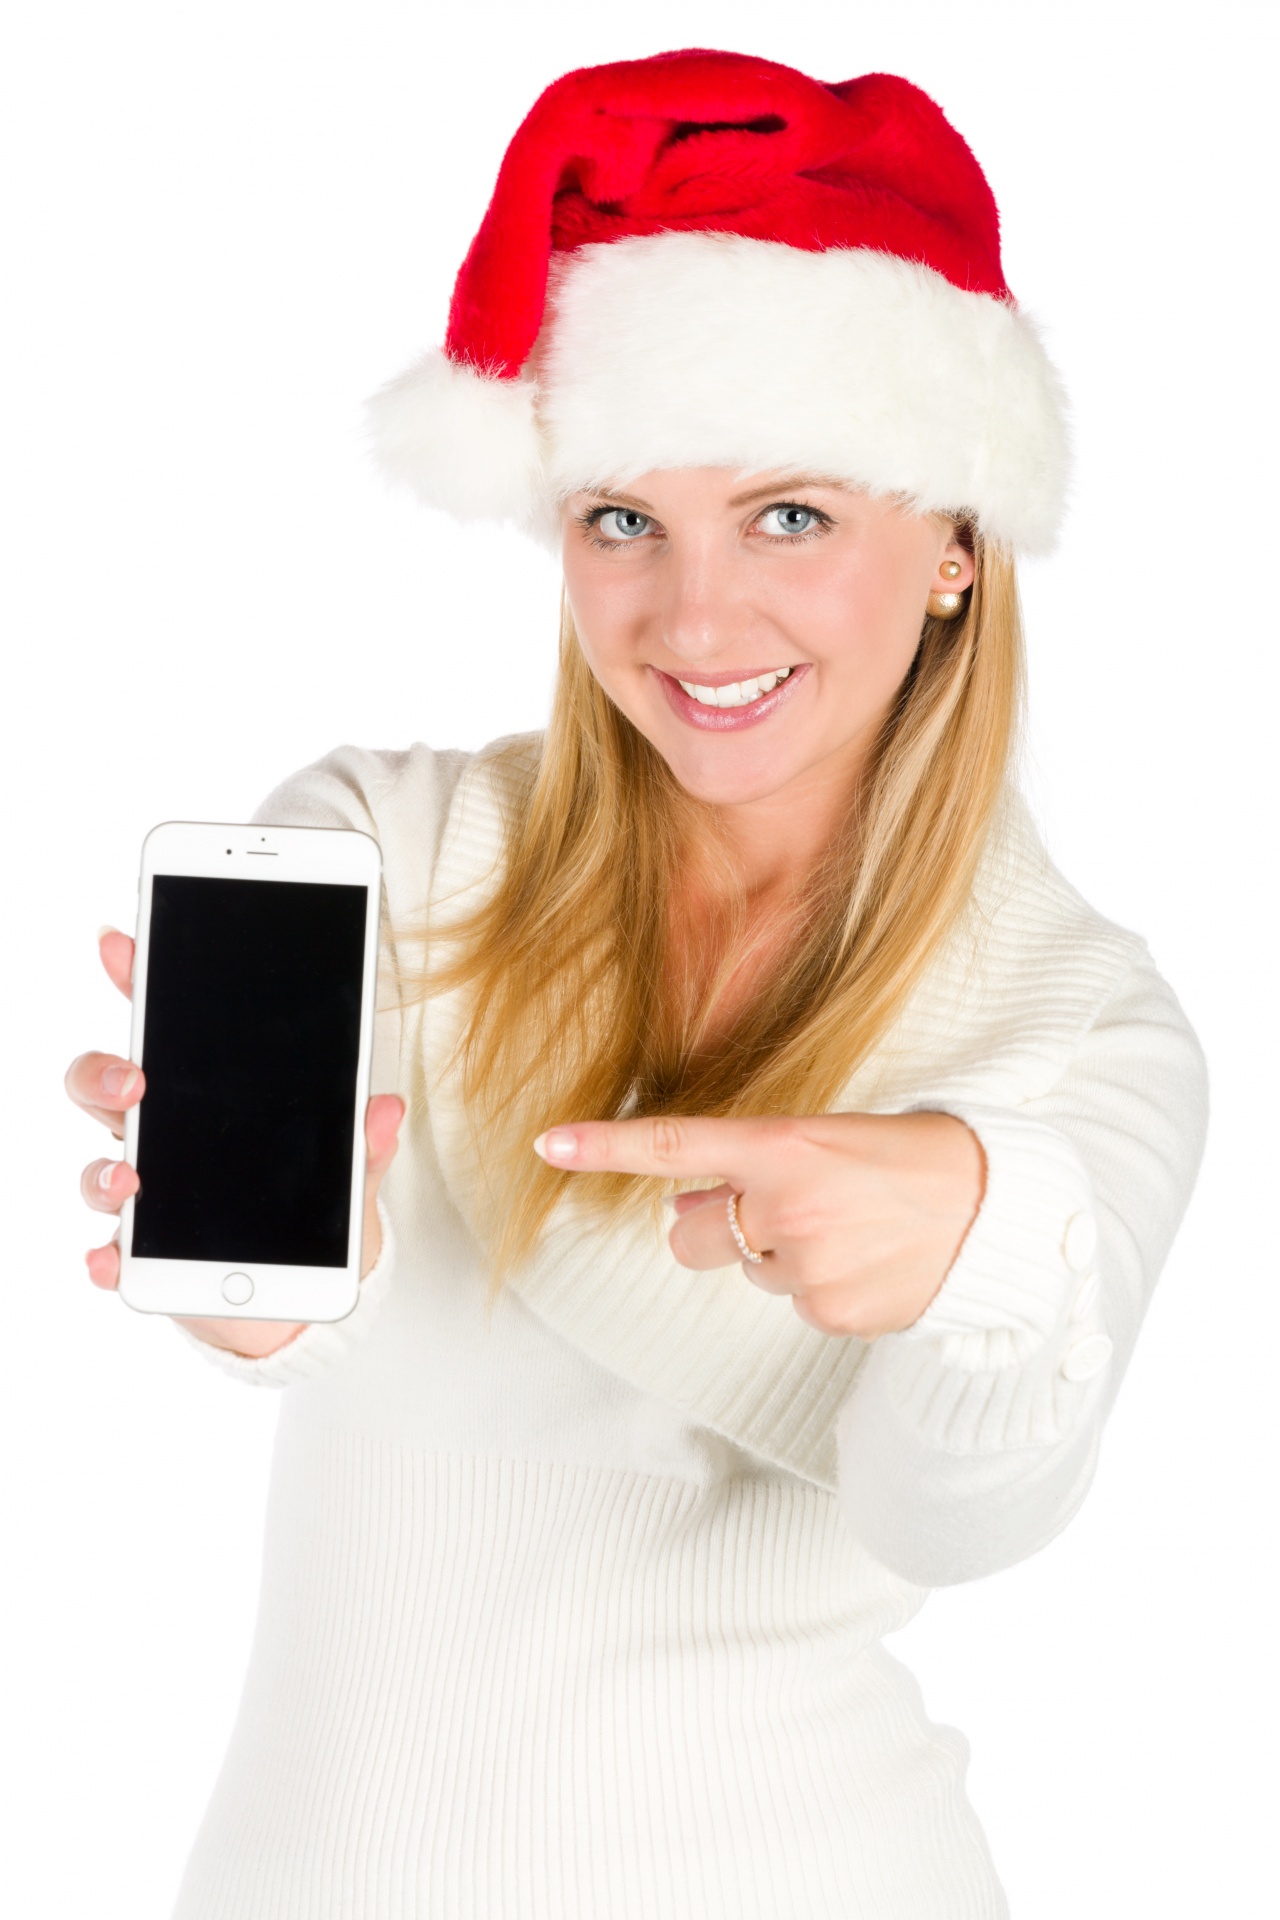 Santa Woman With A Cell Phone